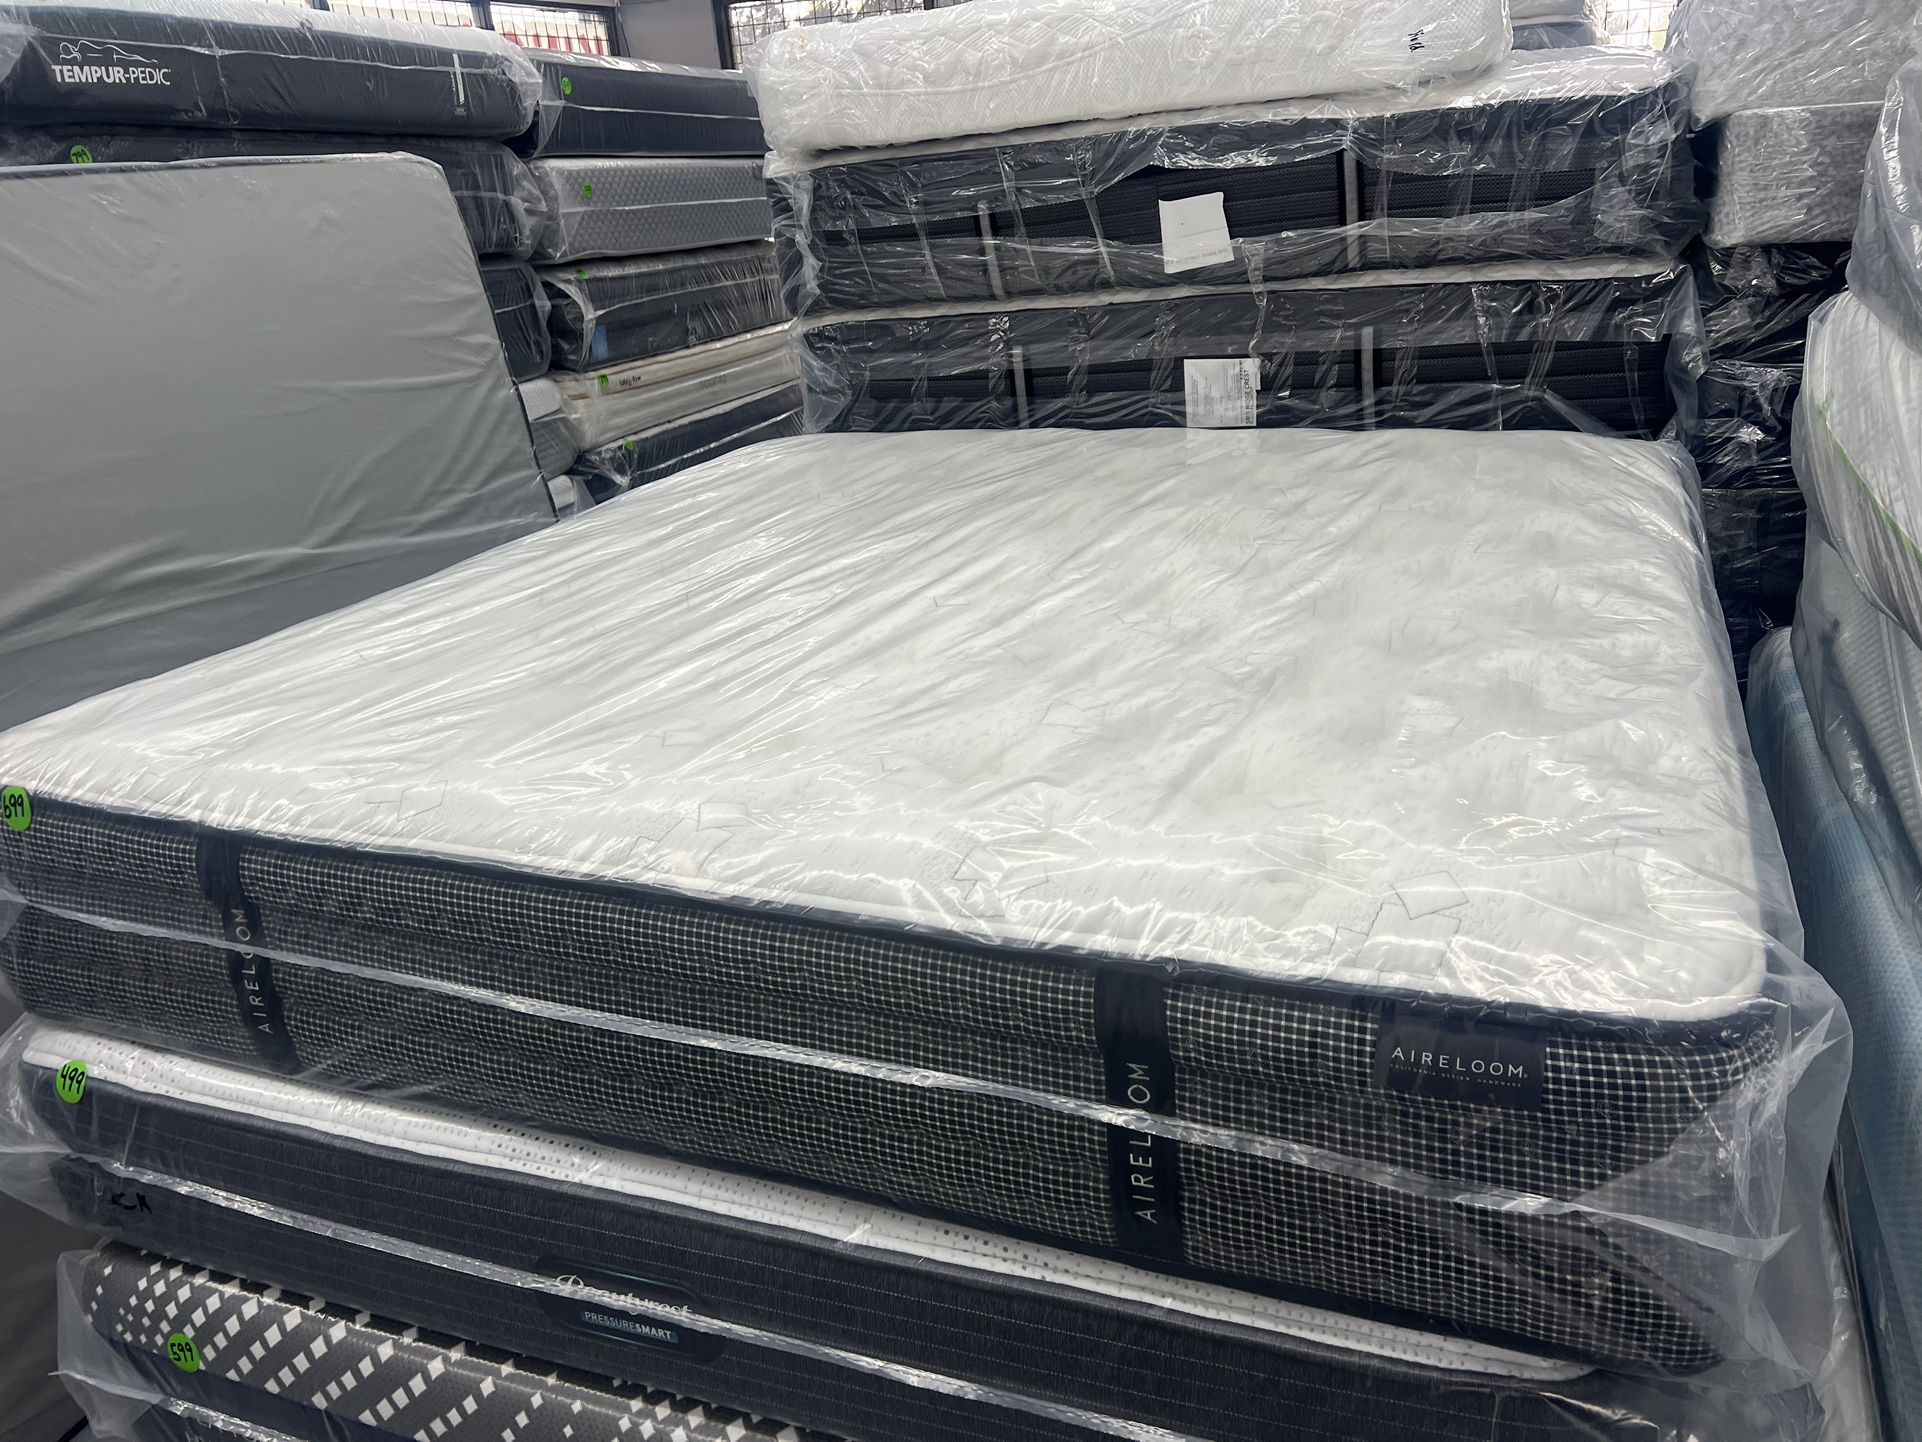 KING SIZE KLUFT AIRELOOM MATTRESS & BOX SPRINGS BED SET